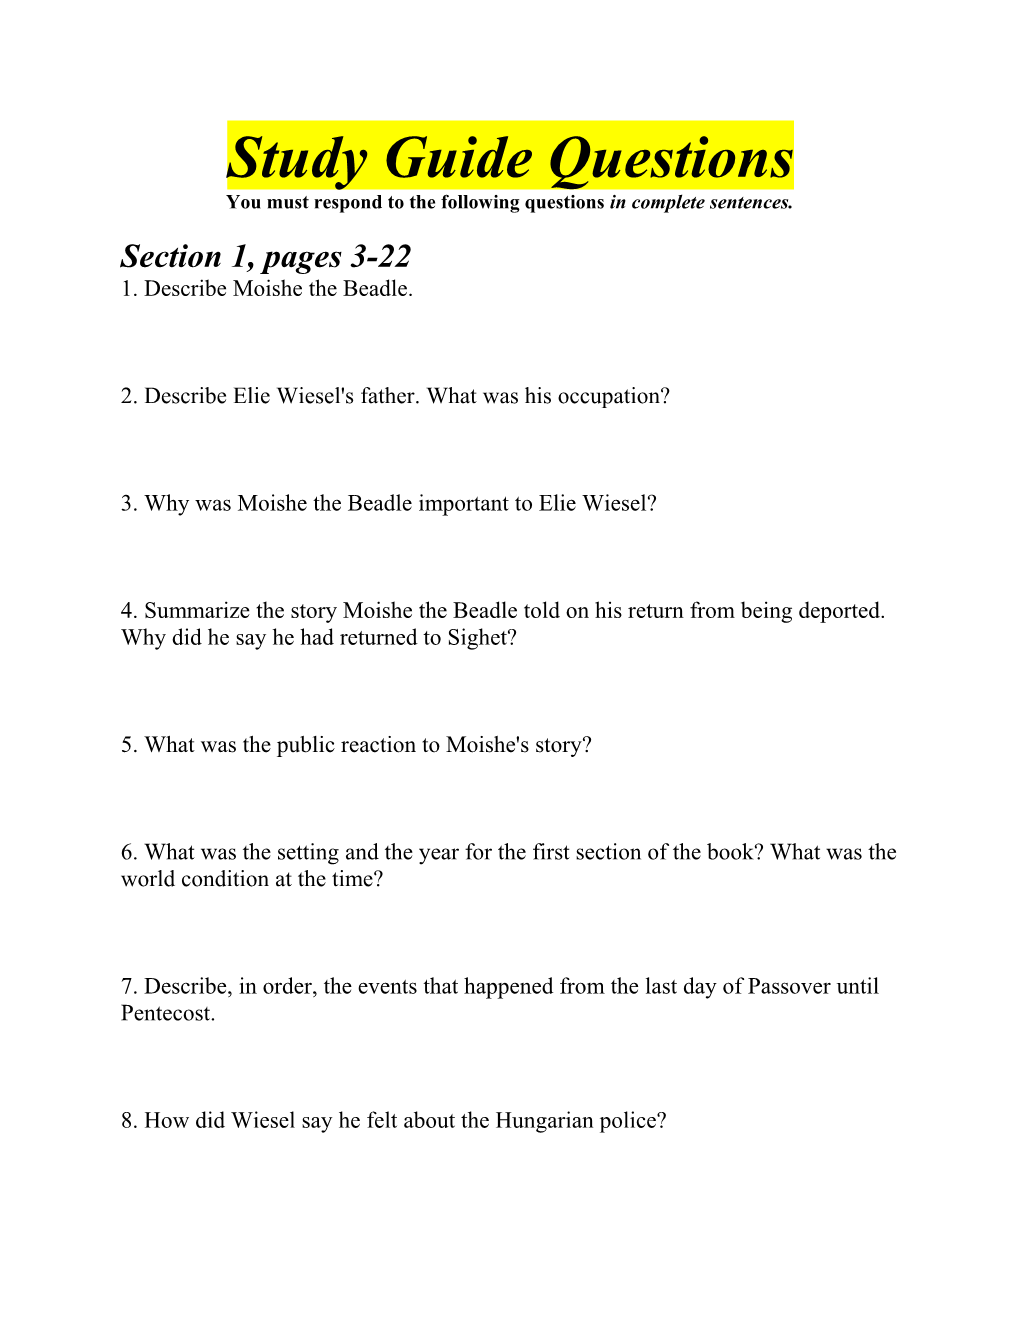 Study Guide Questions s1